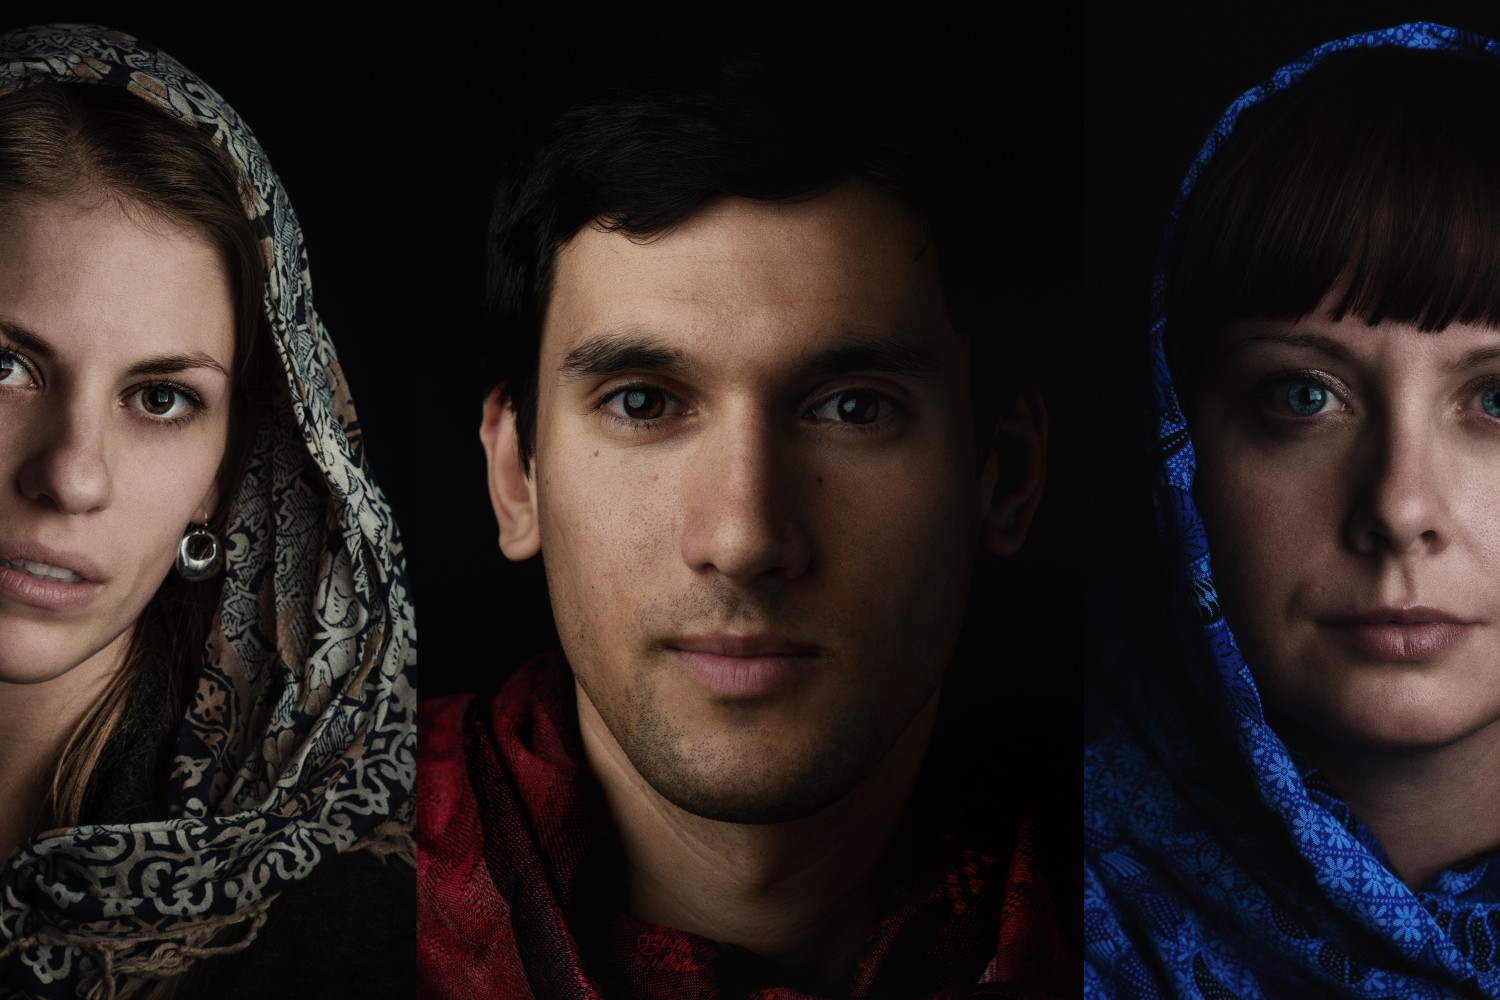 Tutorial: How to Capture Painterly Chiaroscuro Portraits